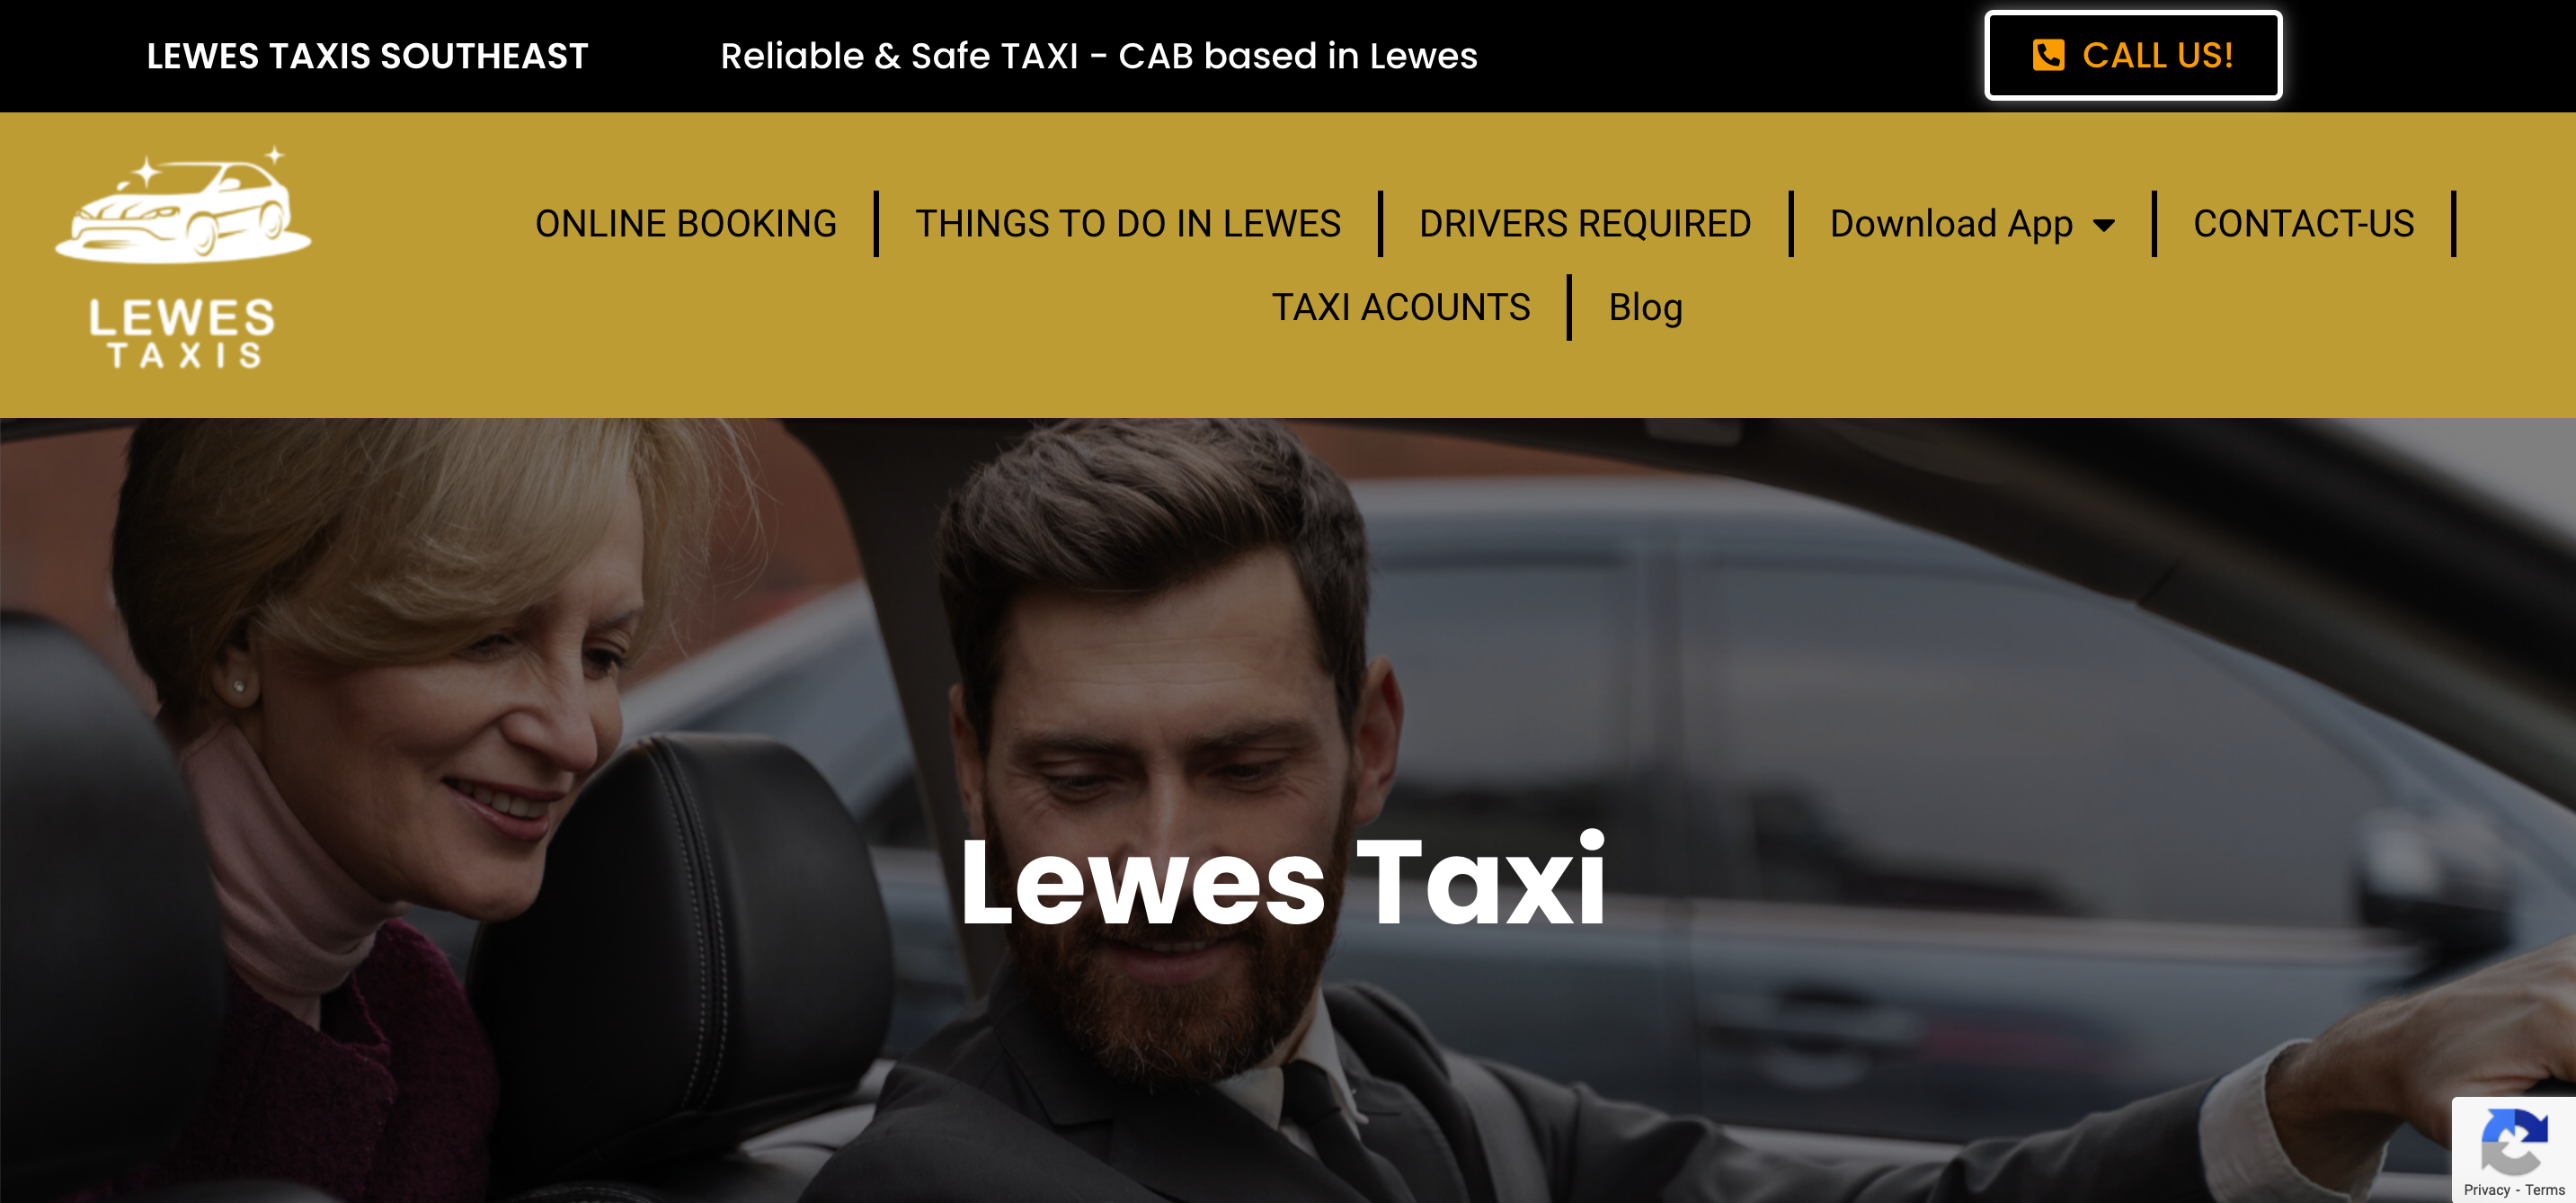 Lewes Taxis